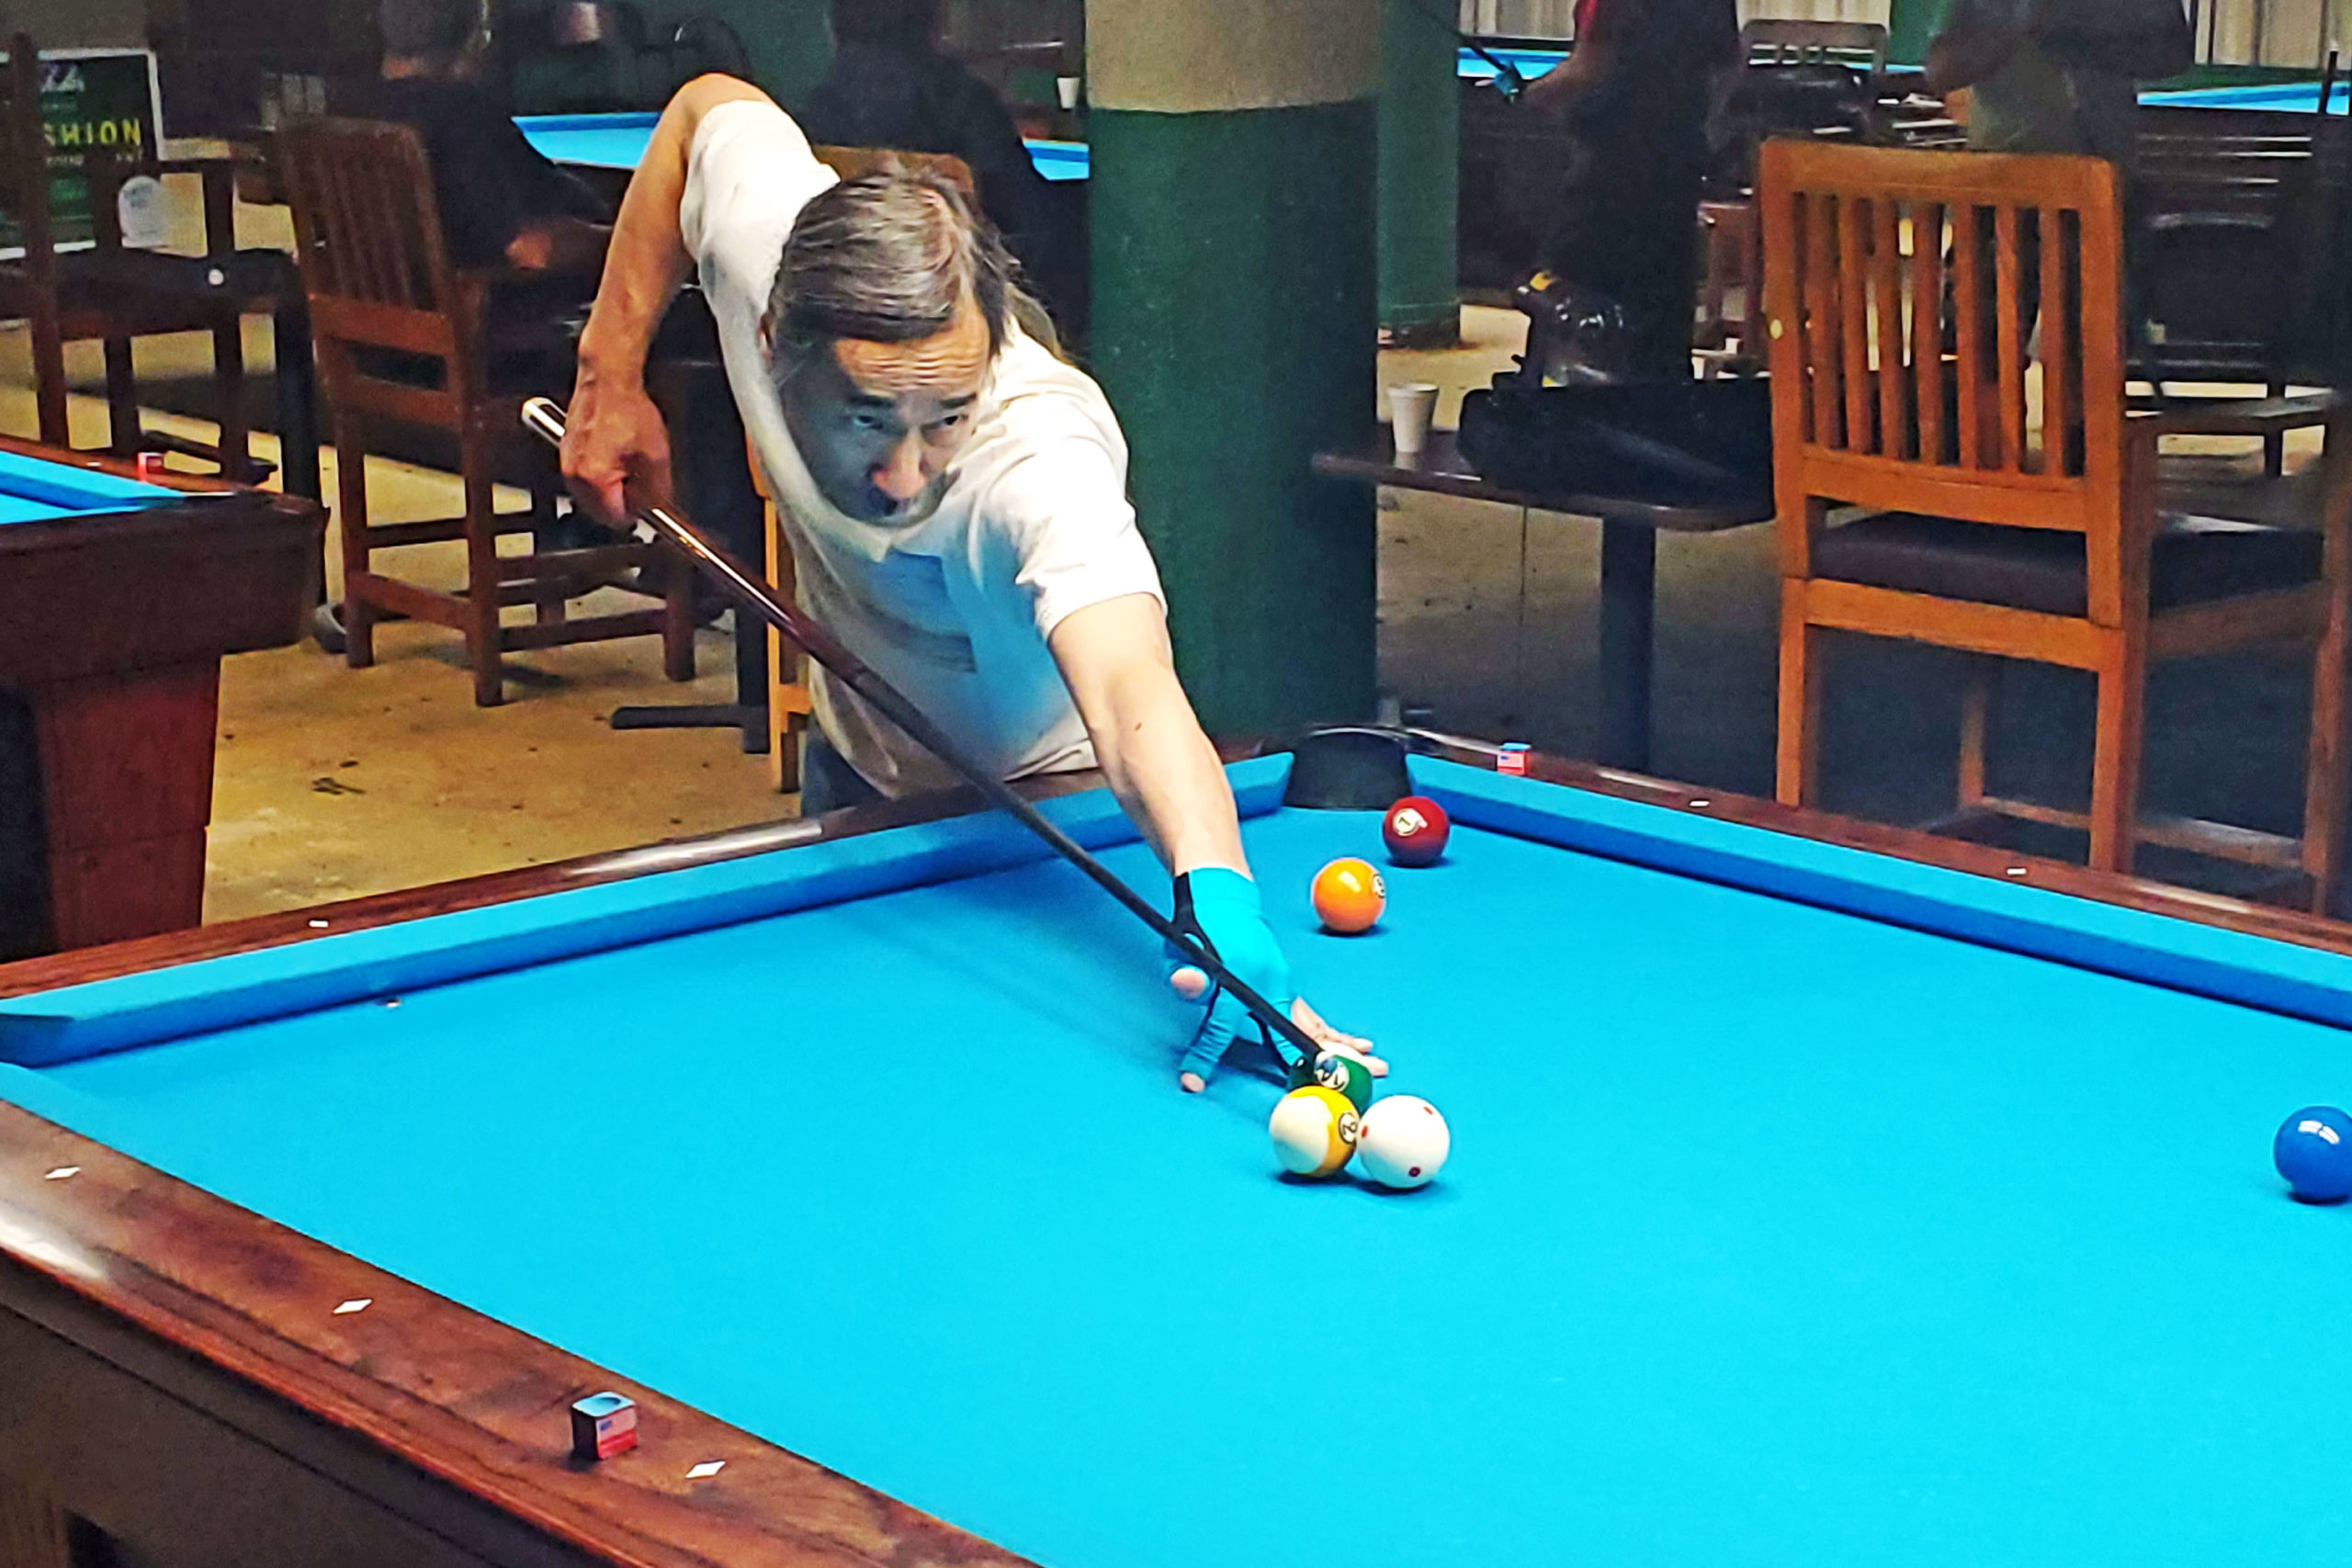 Sharking, Running Out, and Dogging at Chriss Billiards